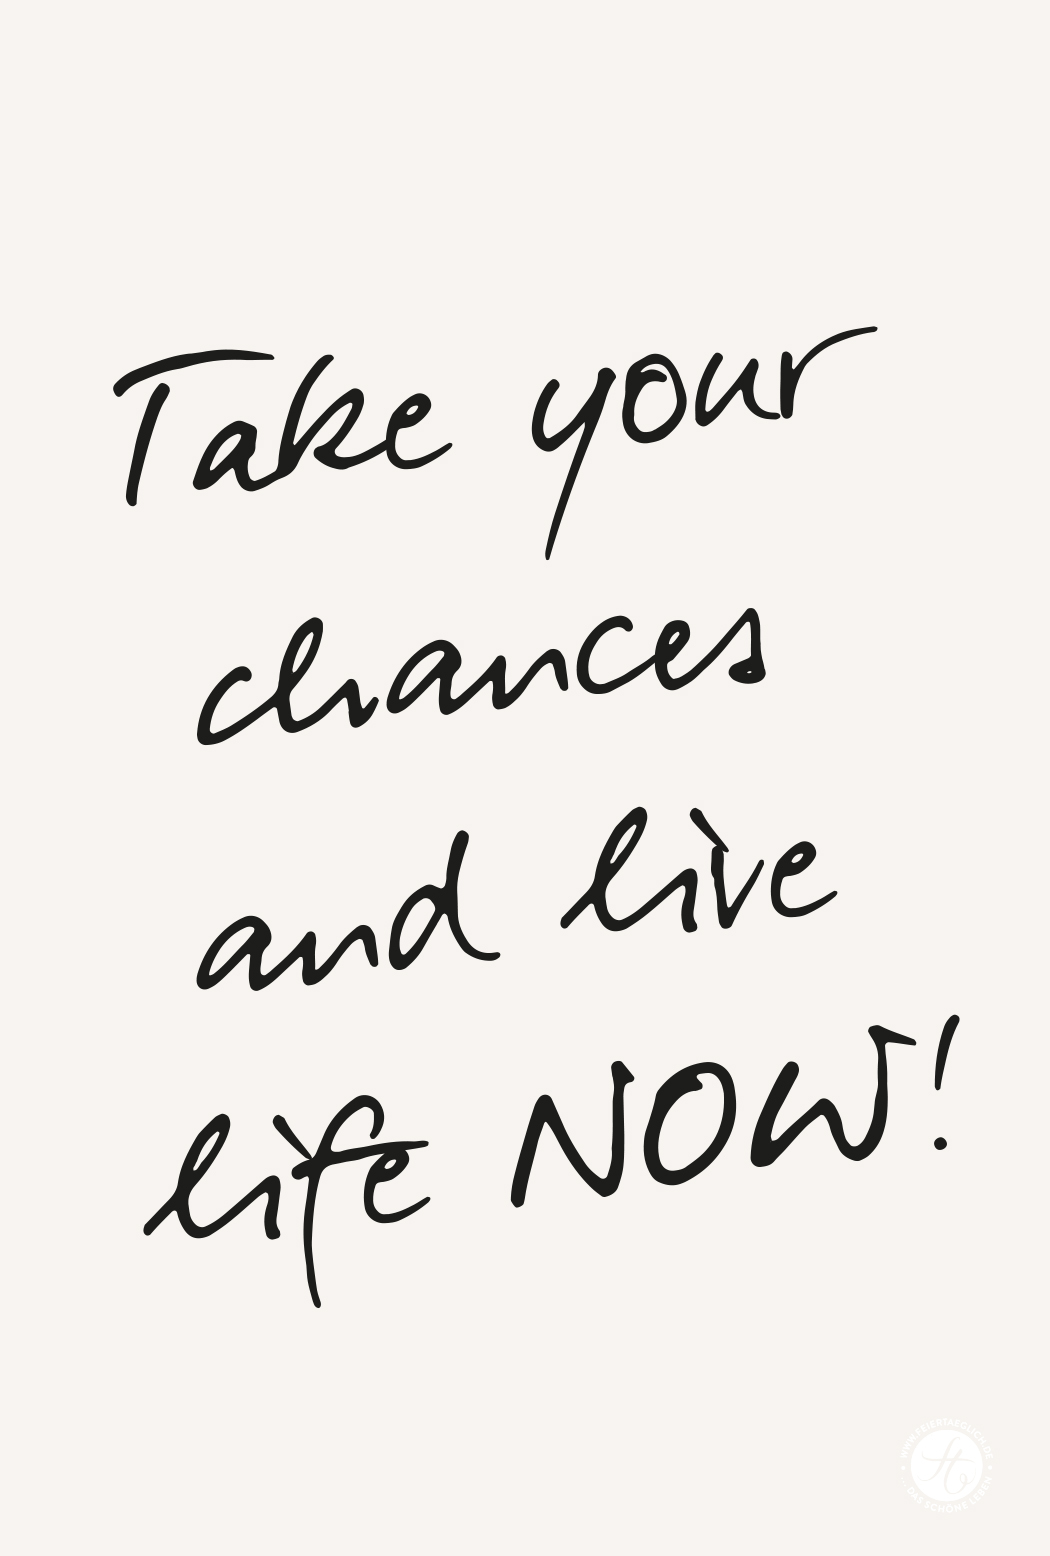 Take your chances and live life now!